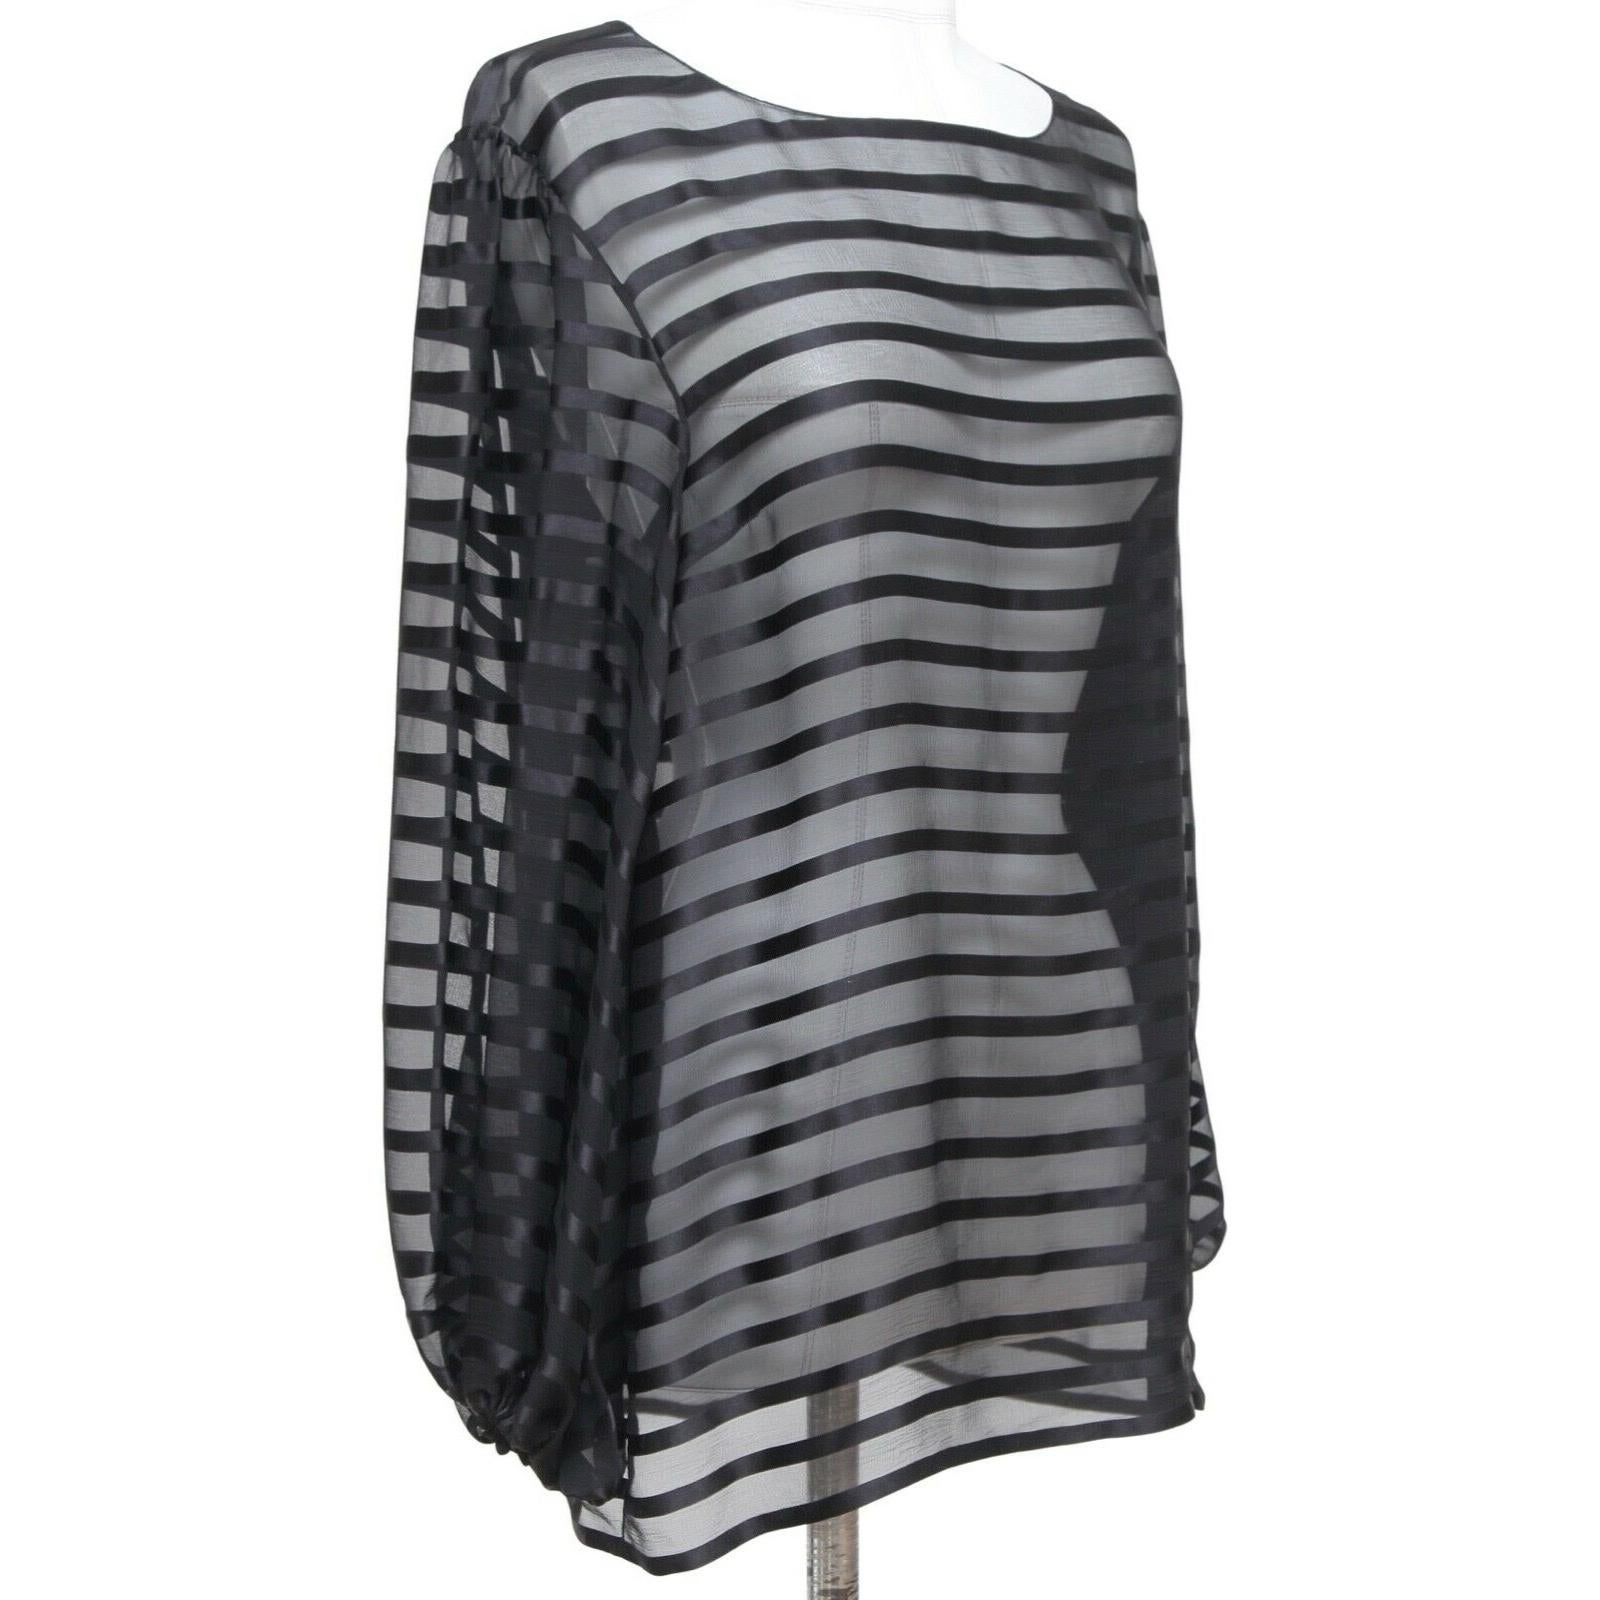 GUARANTEED AUTHENTIC CHANEL 2013 BLACK STRIPED SILK BLOUSE

Design:
- Sheer black silk long sleeve blouse.
- Bateau neckline.
- Slip on.
- Elasticized at cuffs.
- CC plaque at left hip.

Material: 100% Silk

Size: 38

Measurements (Approximate laid